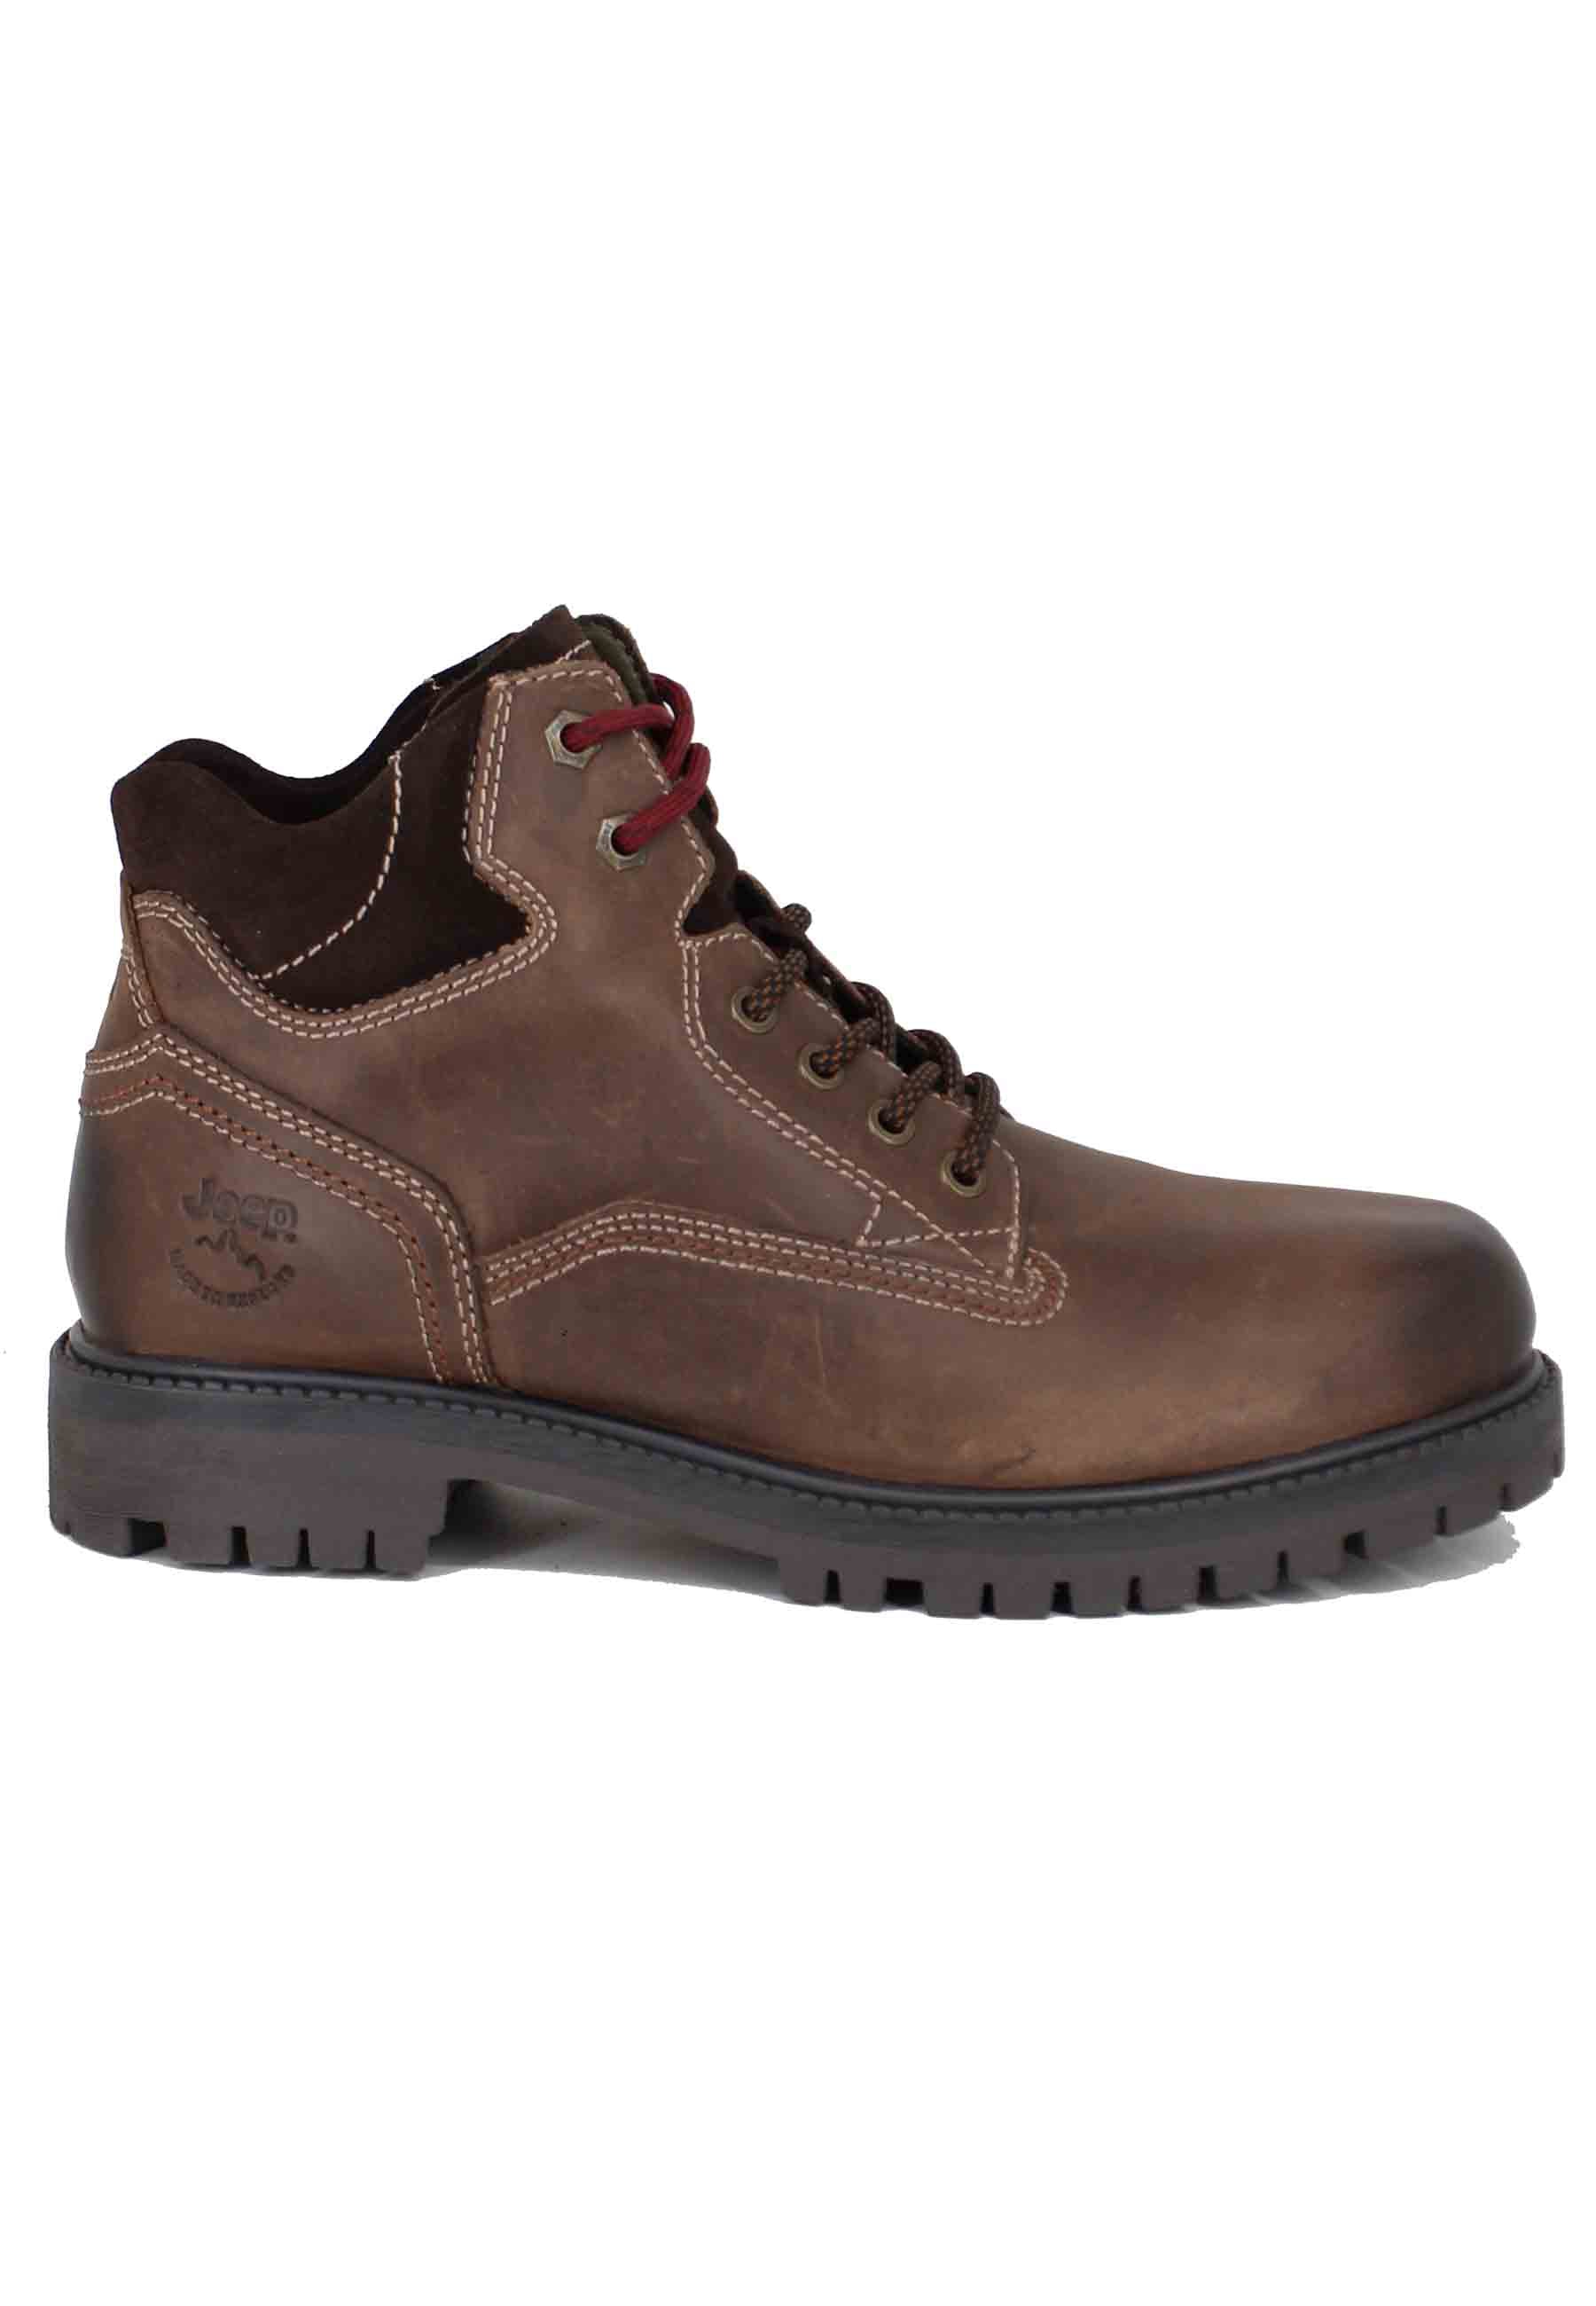 Willys men's traking boots in dark brown oiled leather